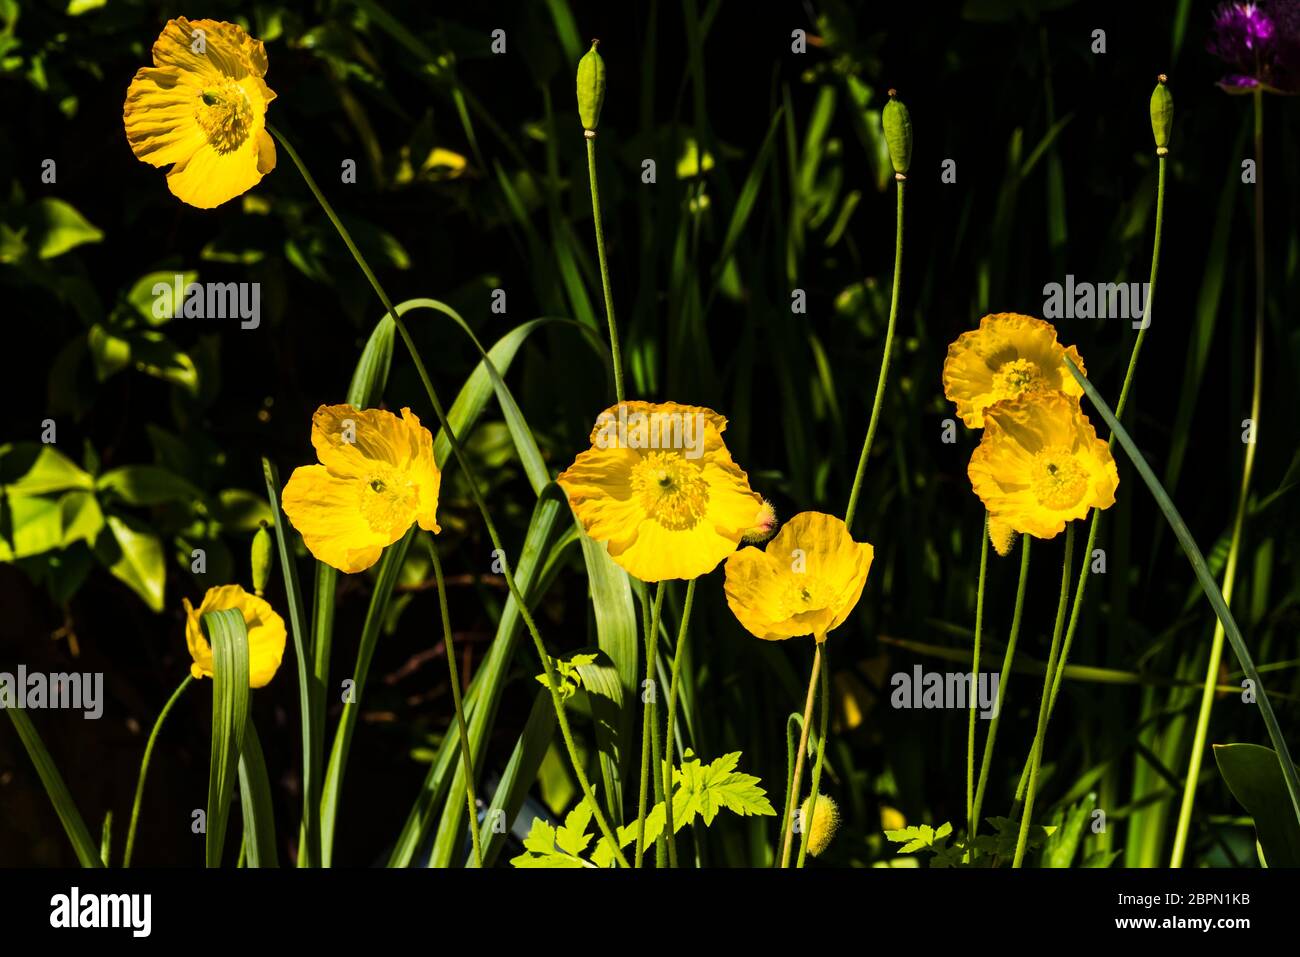 Outside close-up of a group of yellow Welsh Poppies (Meconopsis cambrica) Stock Photo